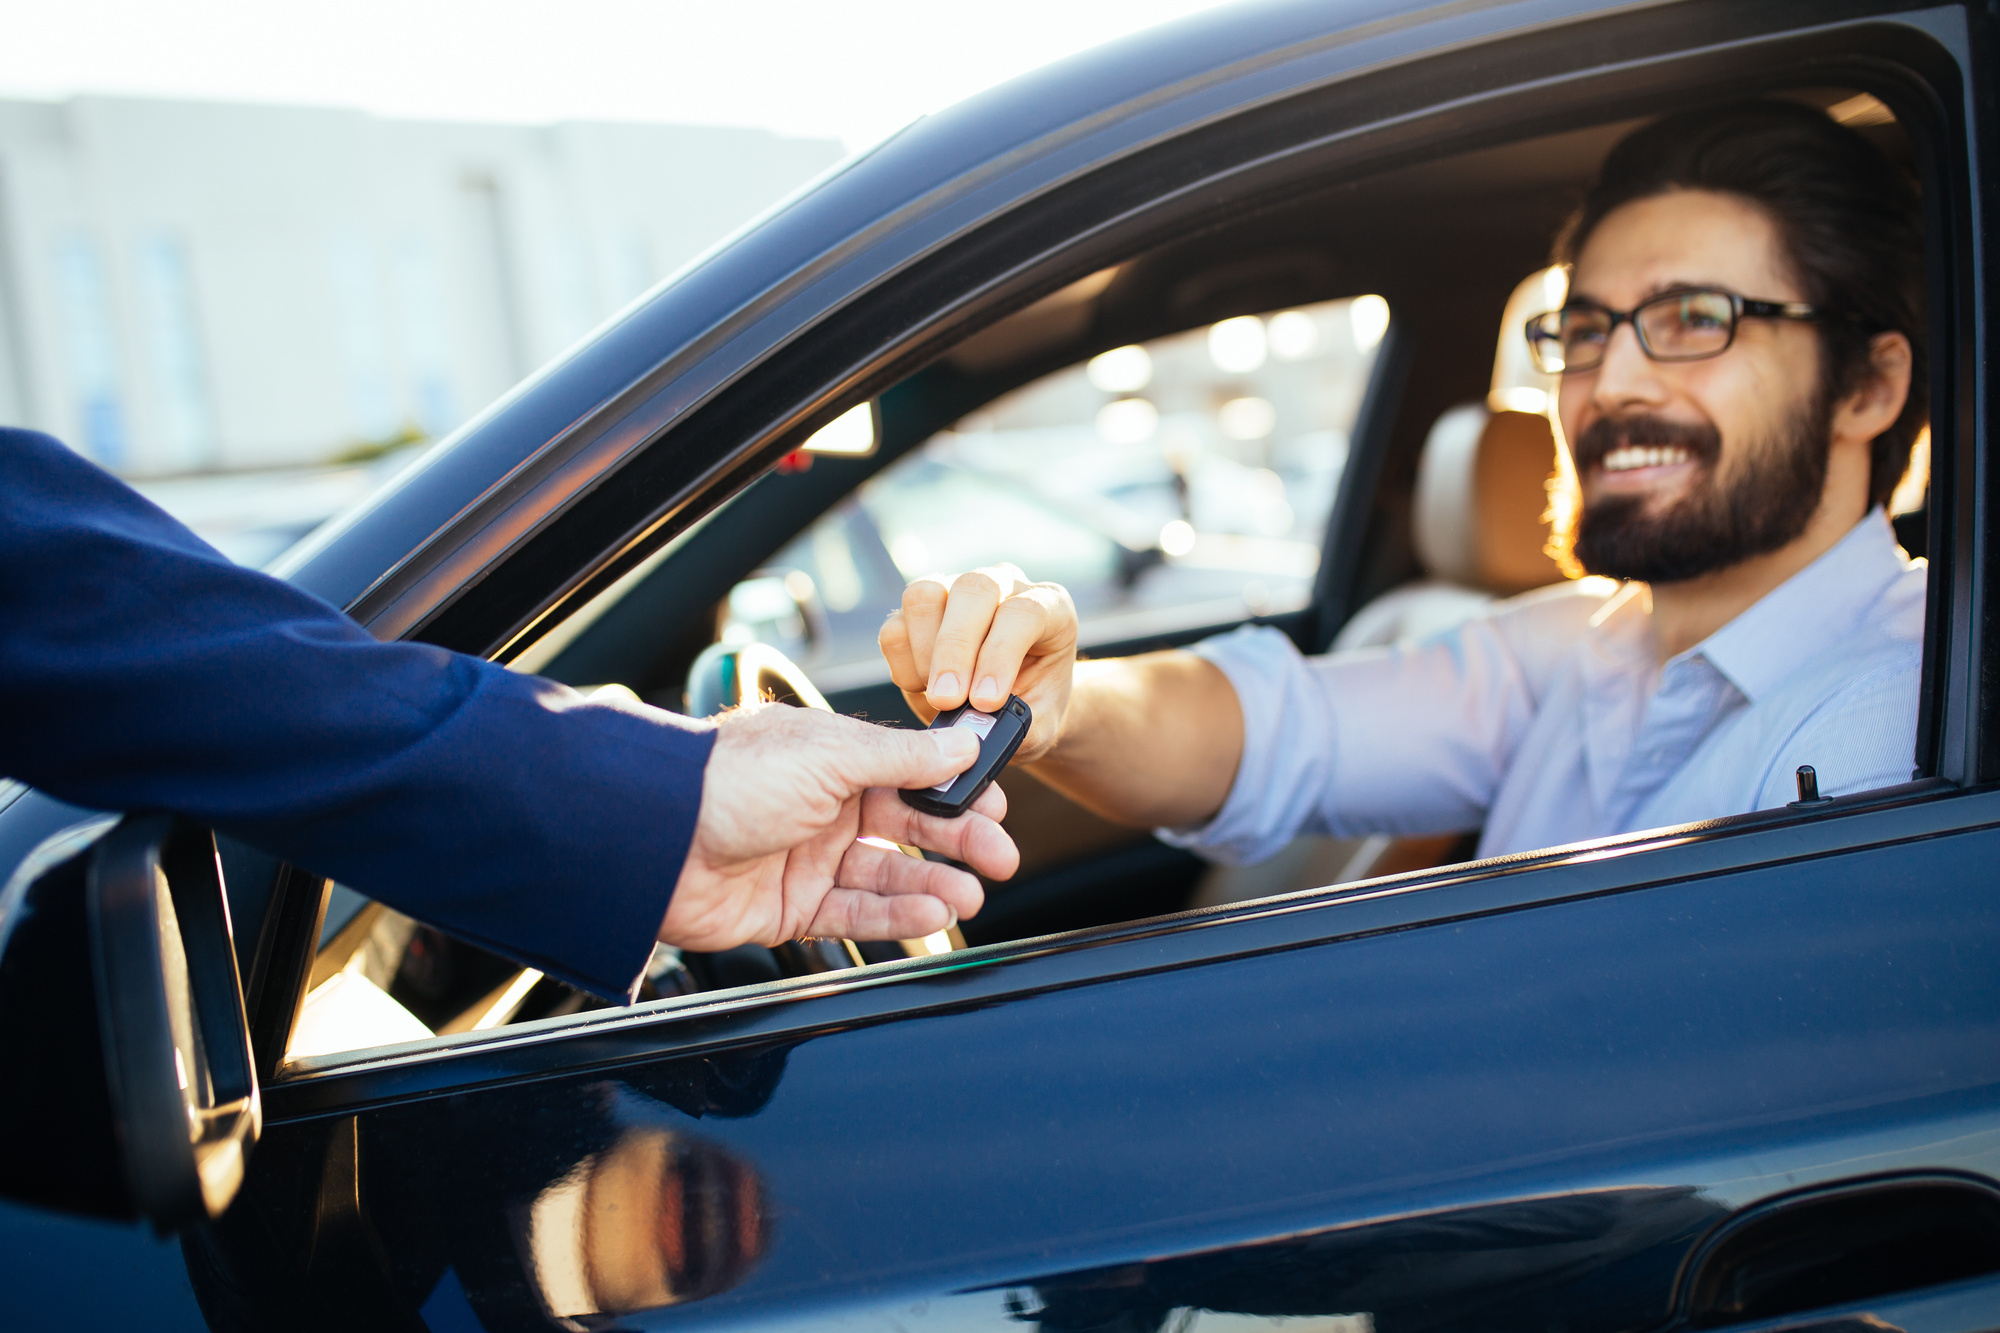 car services in dfw